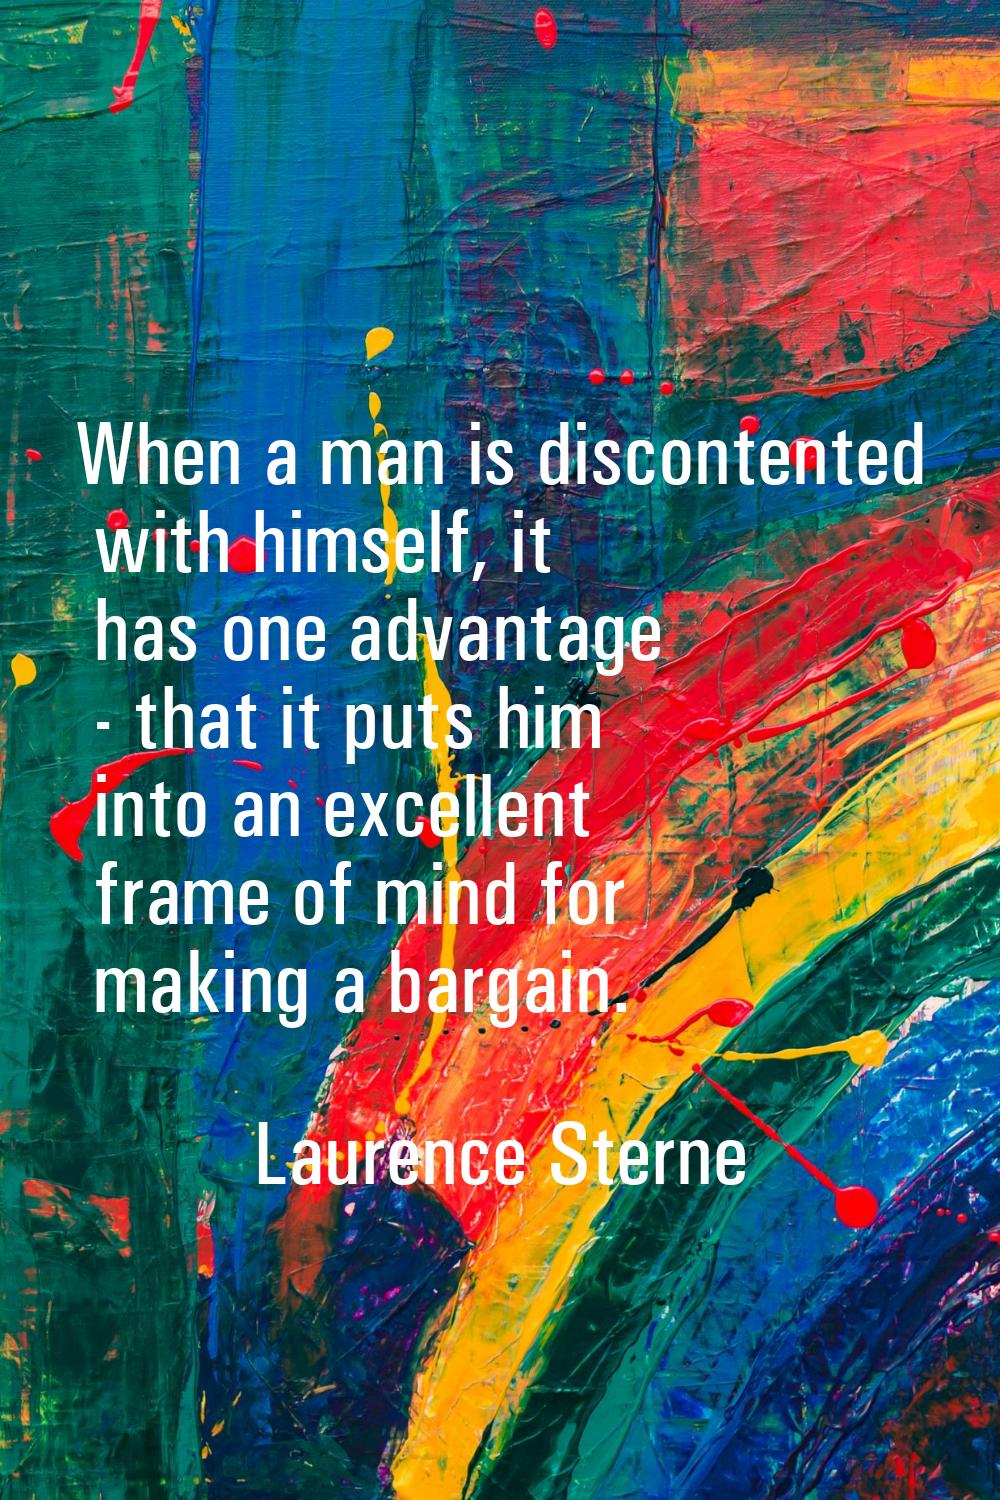 When a man is discontented with himself, it has one advantage - that it puts him into an excellent 